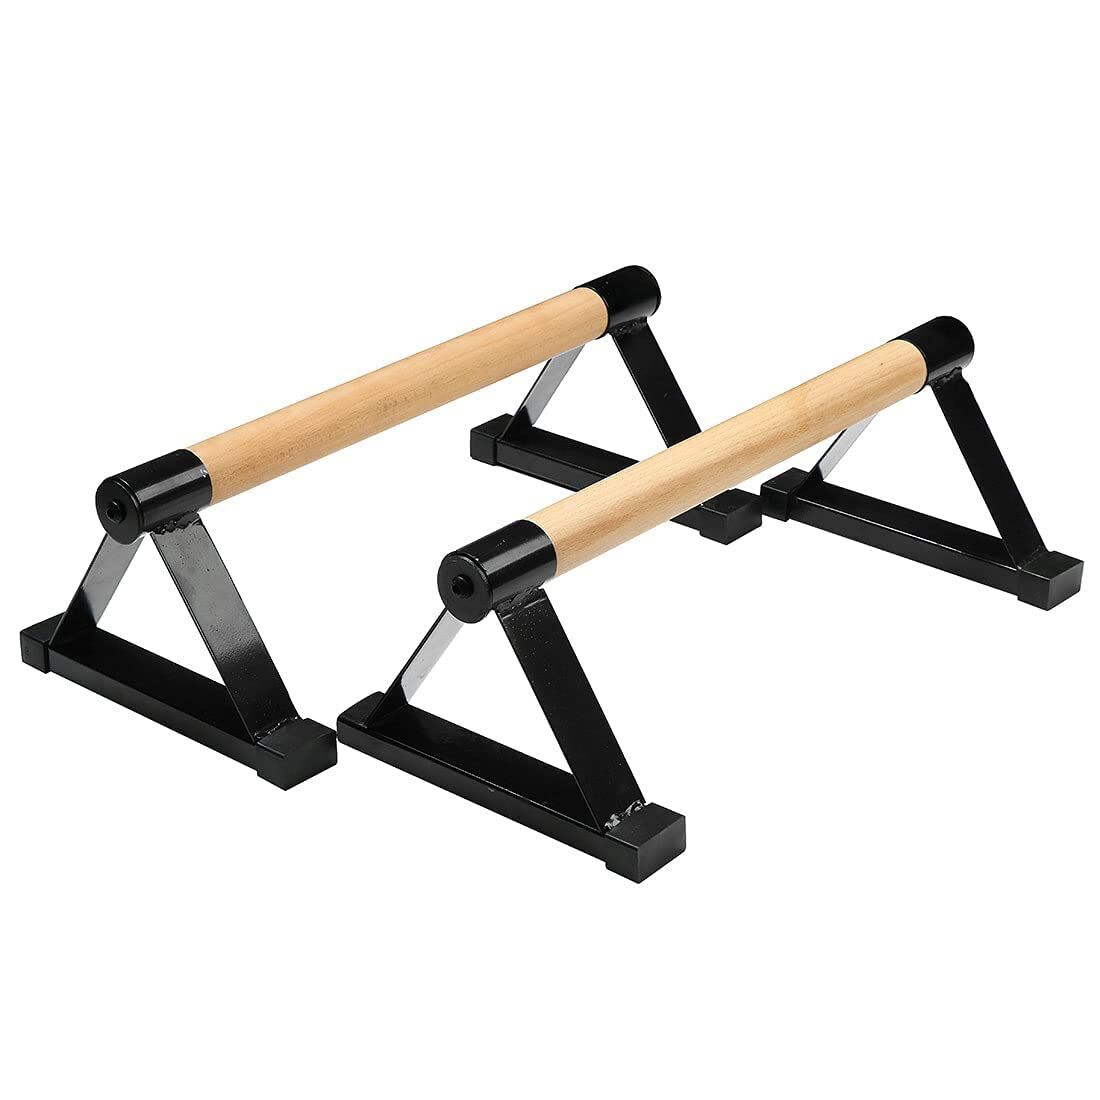 Driven | Professional Large Beech Wooden Parallettes | Calisthenics | Push  Up Bars | Anti Slip Base | Gym Gear Workout Portable Crossfit